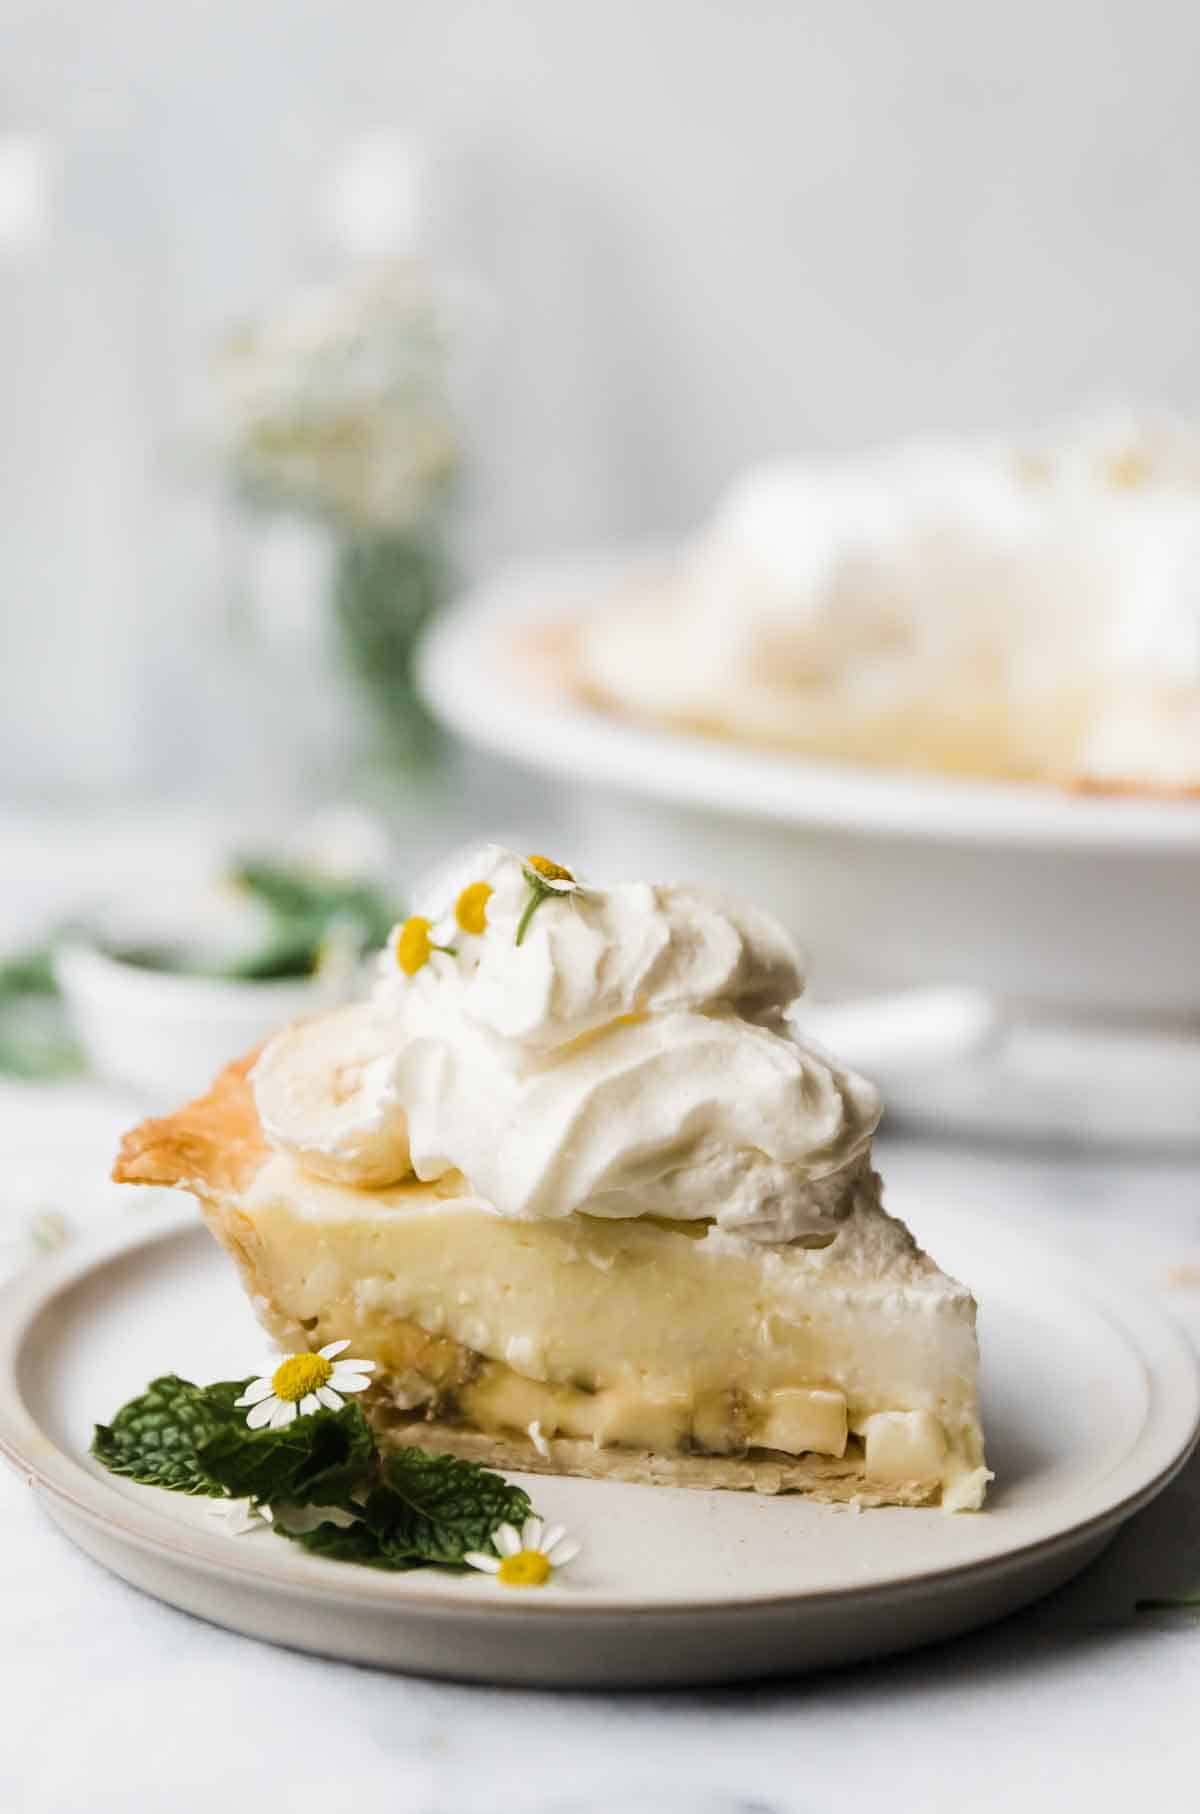 Easy banana cream pie recipe slice and placed on a white plate. It is garnished with whipped cream. Whole pie is in the background.